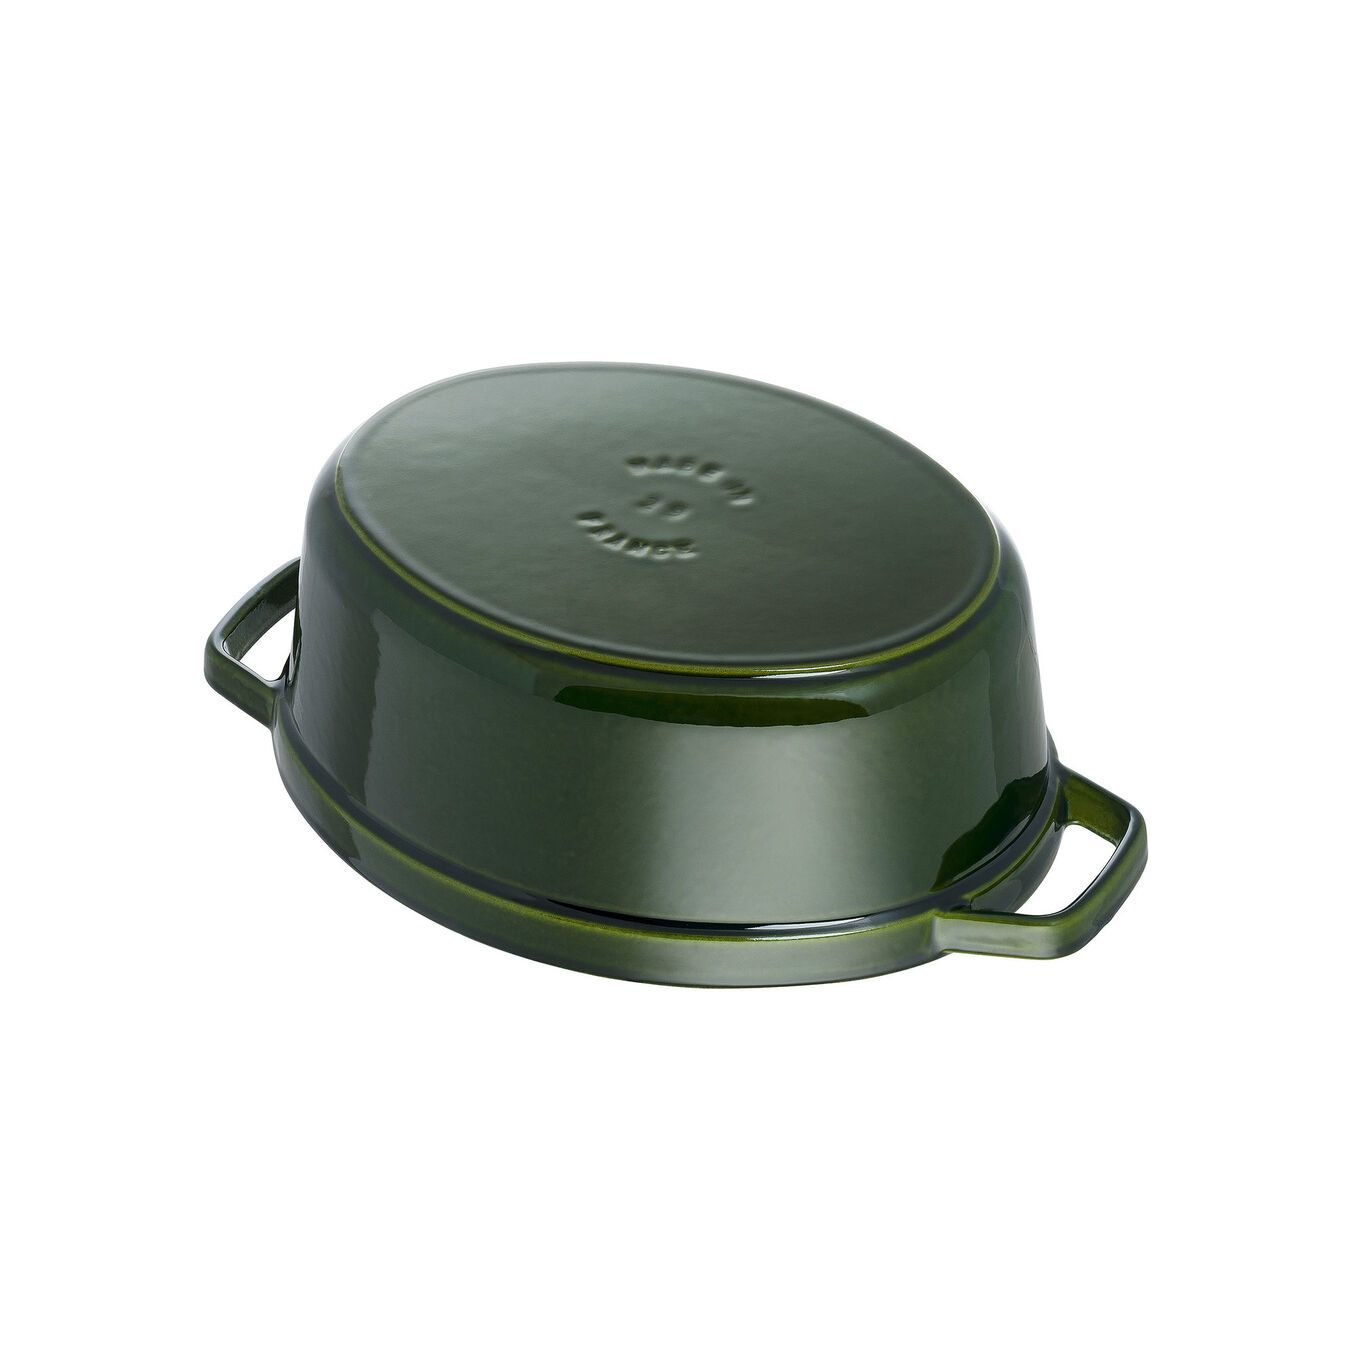 4.25 l cast iron oval Cocotte, basil-green,,large 4